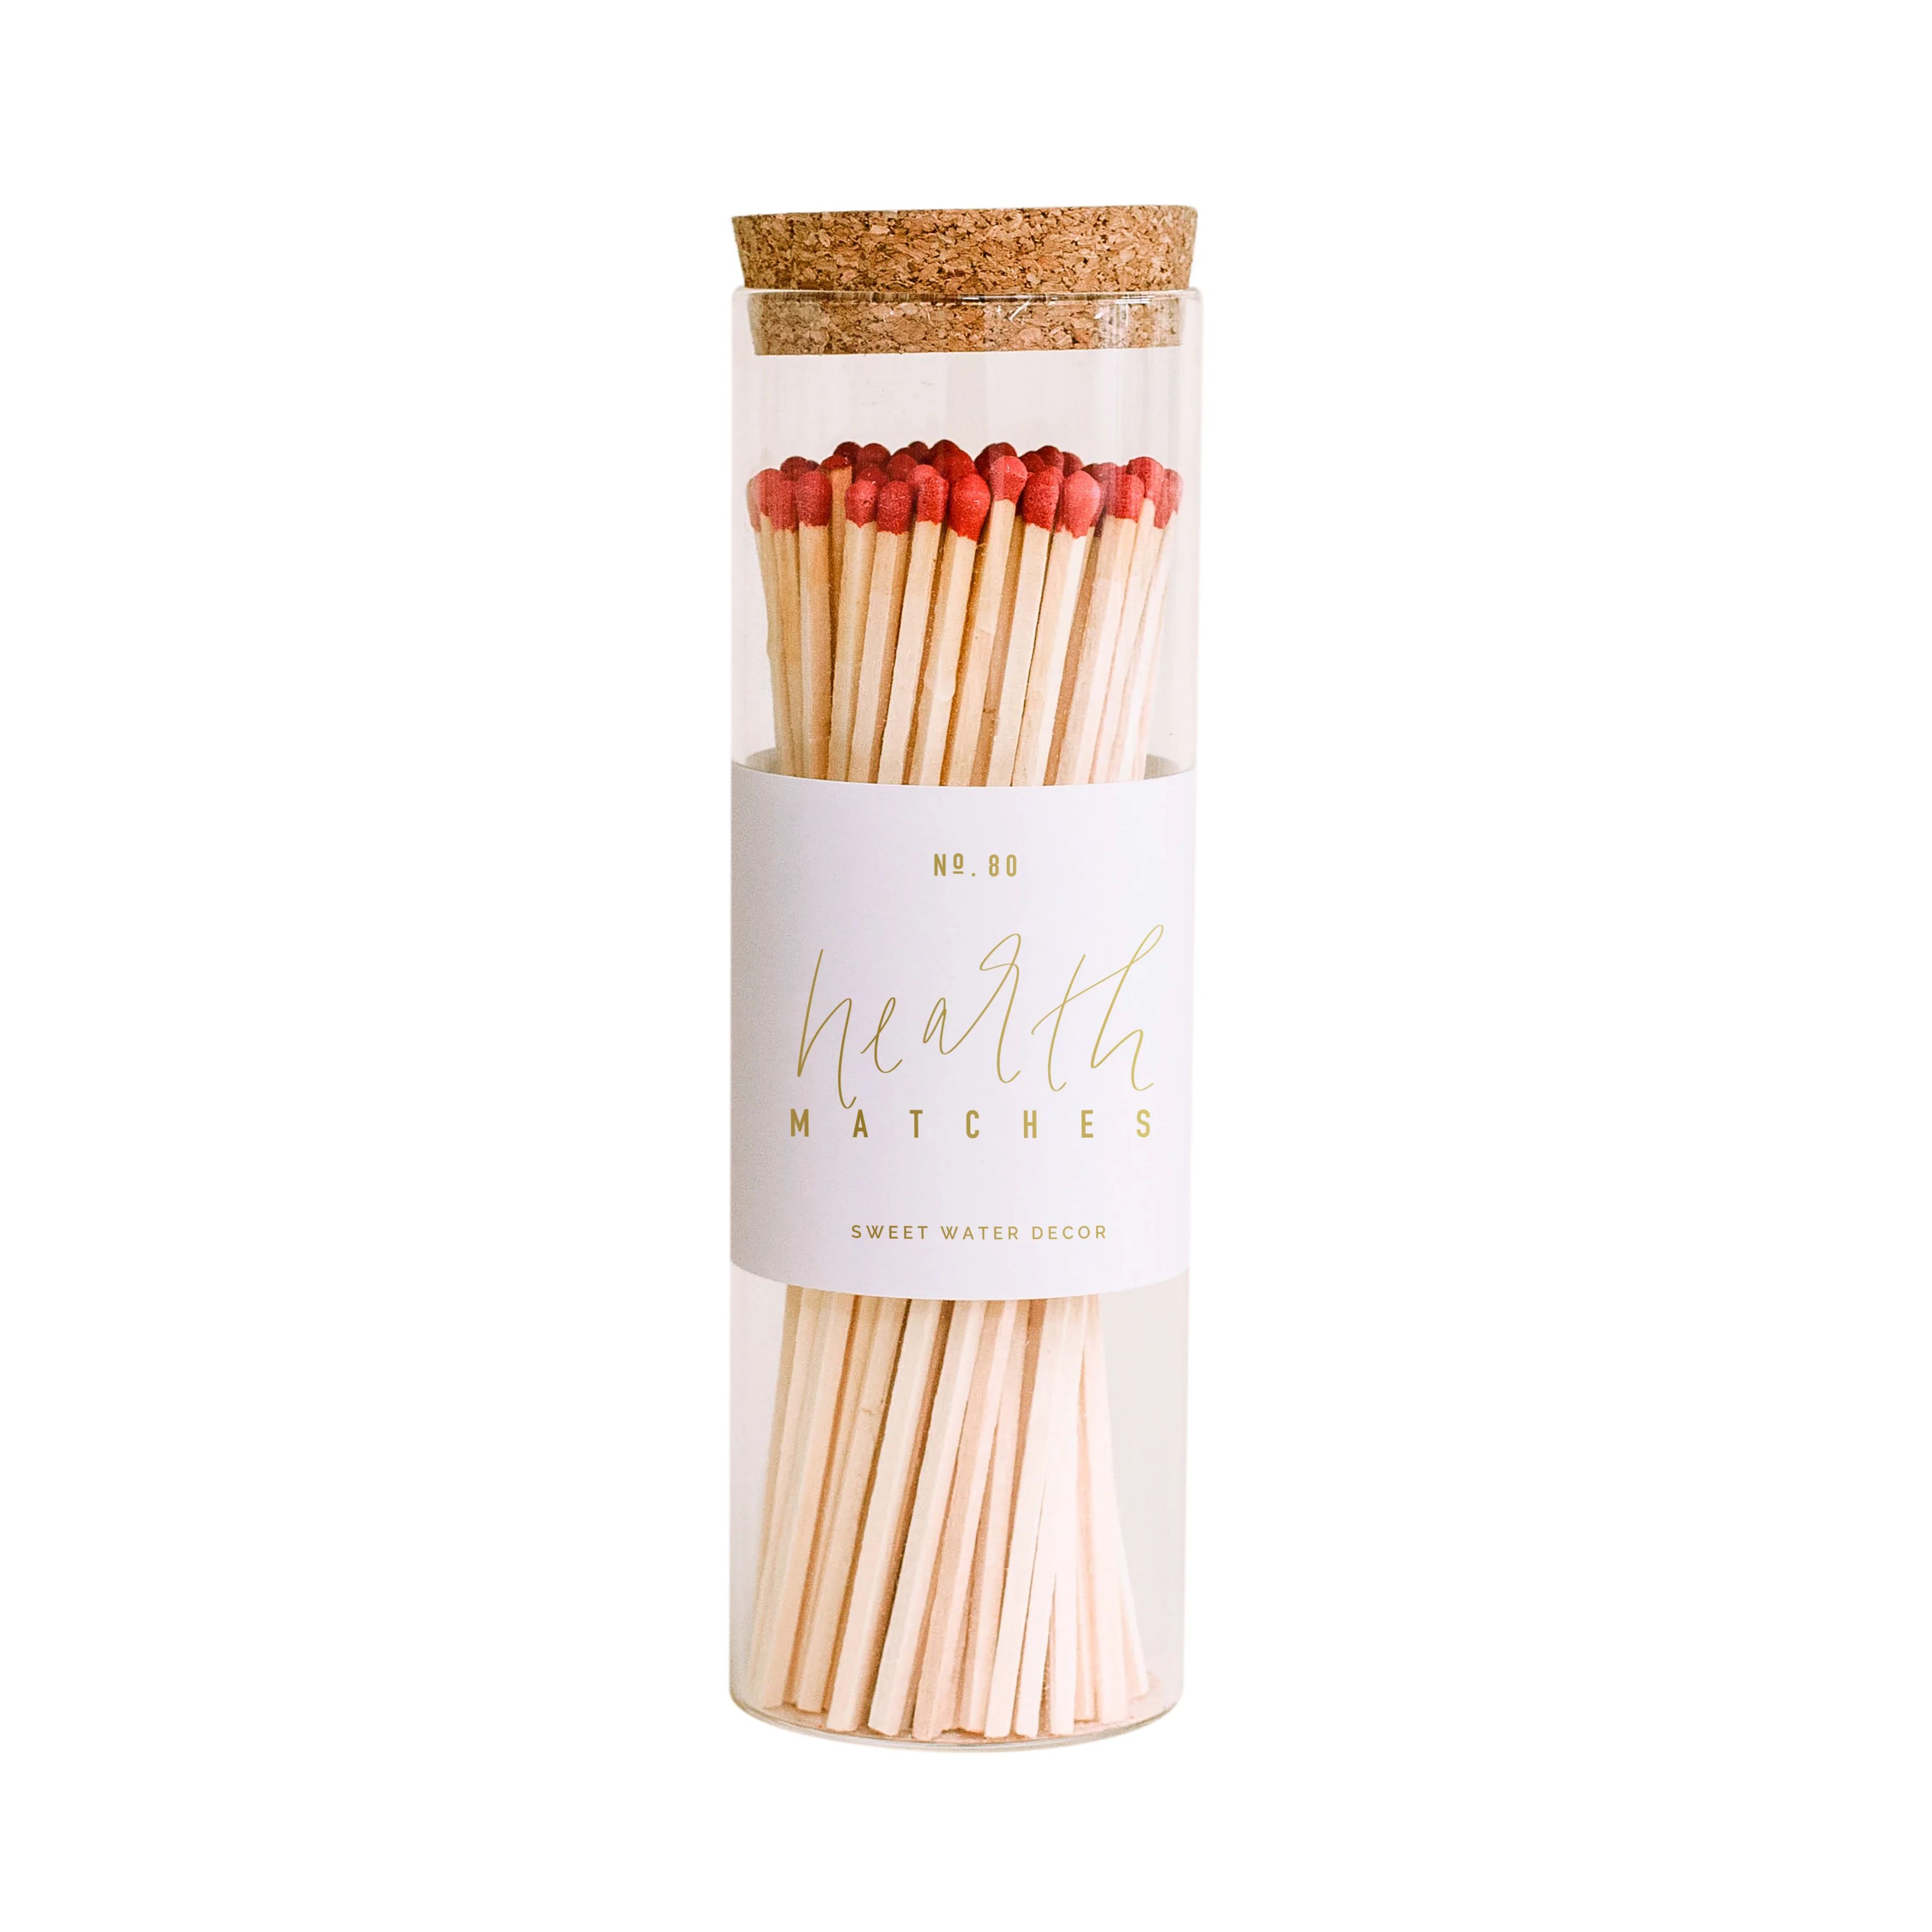 Hearth Matches - Red - 80 Count, 7" | Sweet Water Decor, LLC